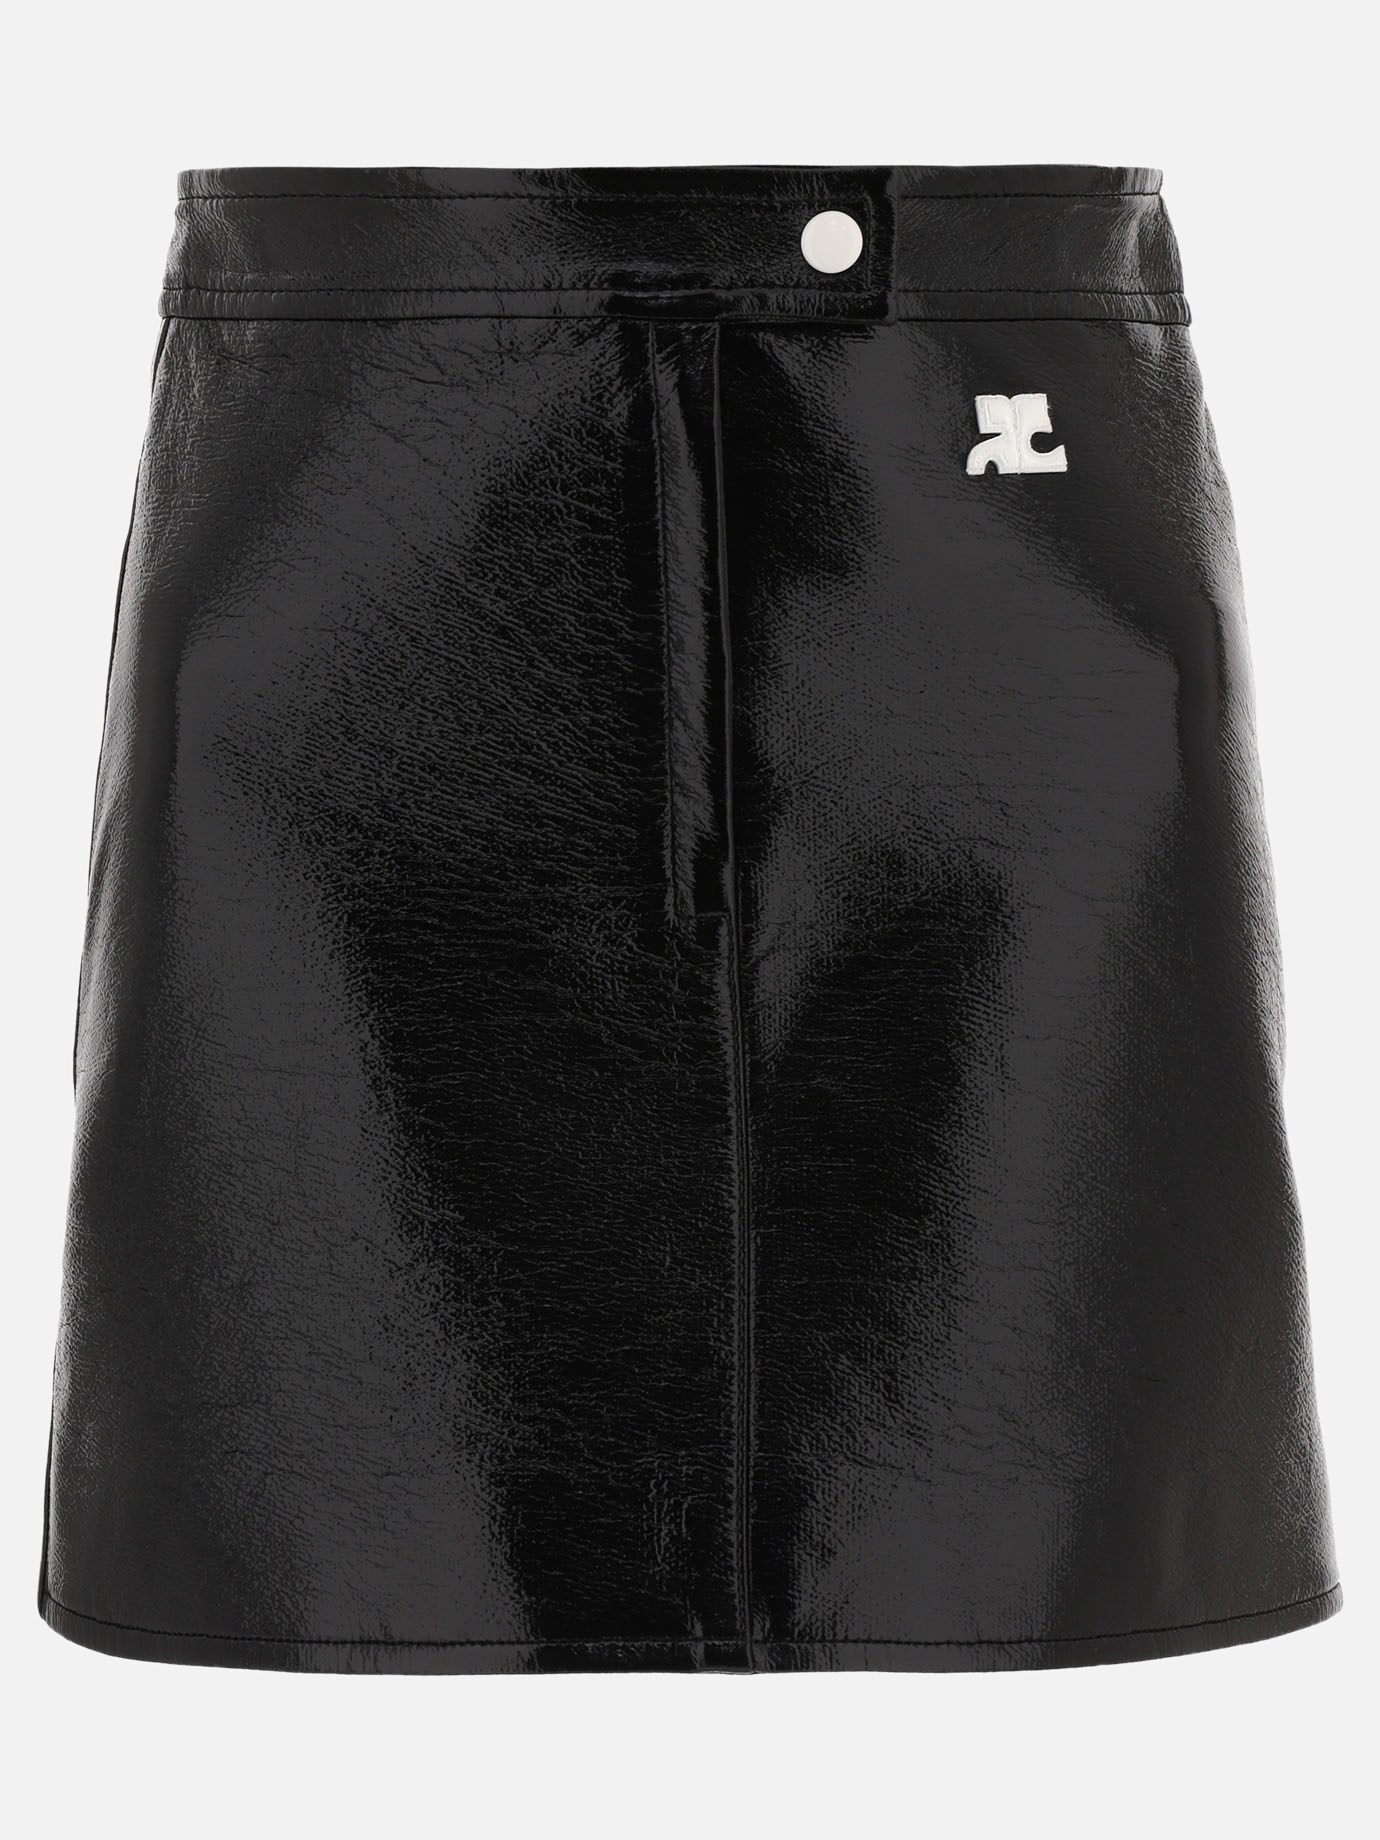 Vinyl skirt with embroidery